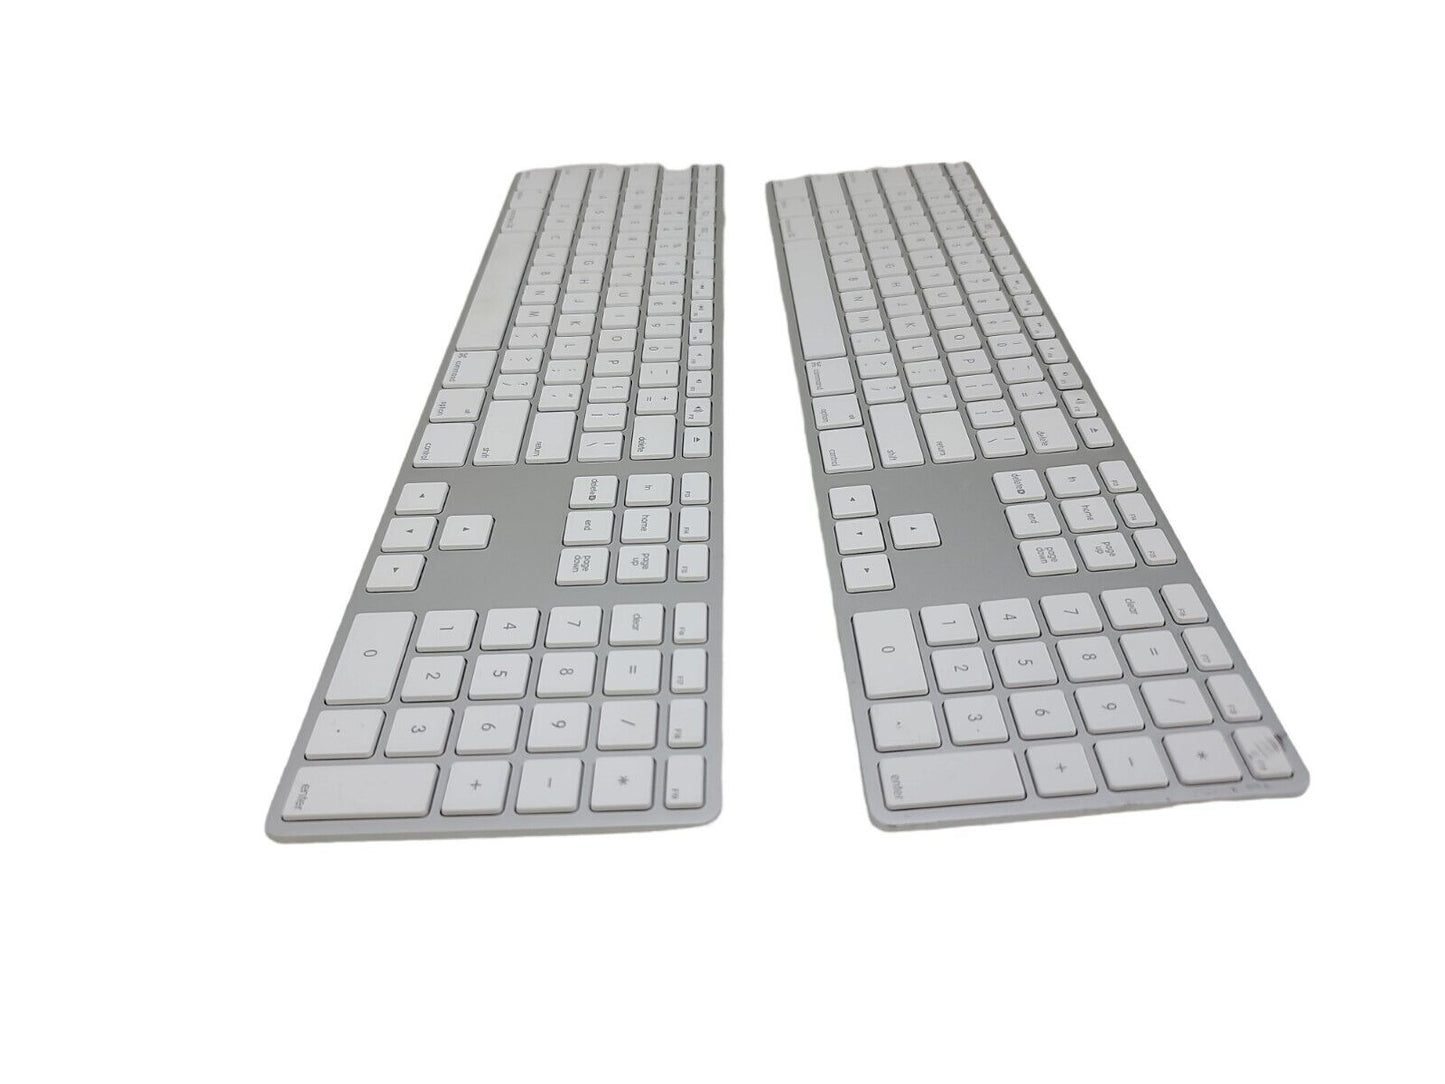 Lot of 2 Original Apple A1243 White/Aluminum USB Wired Standard Keyboard